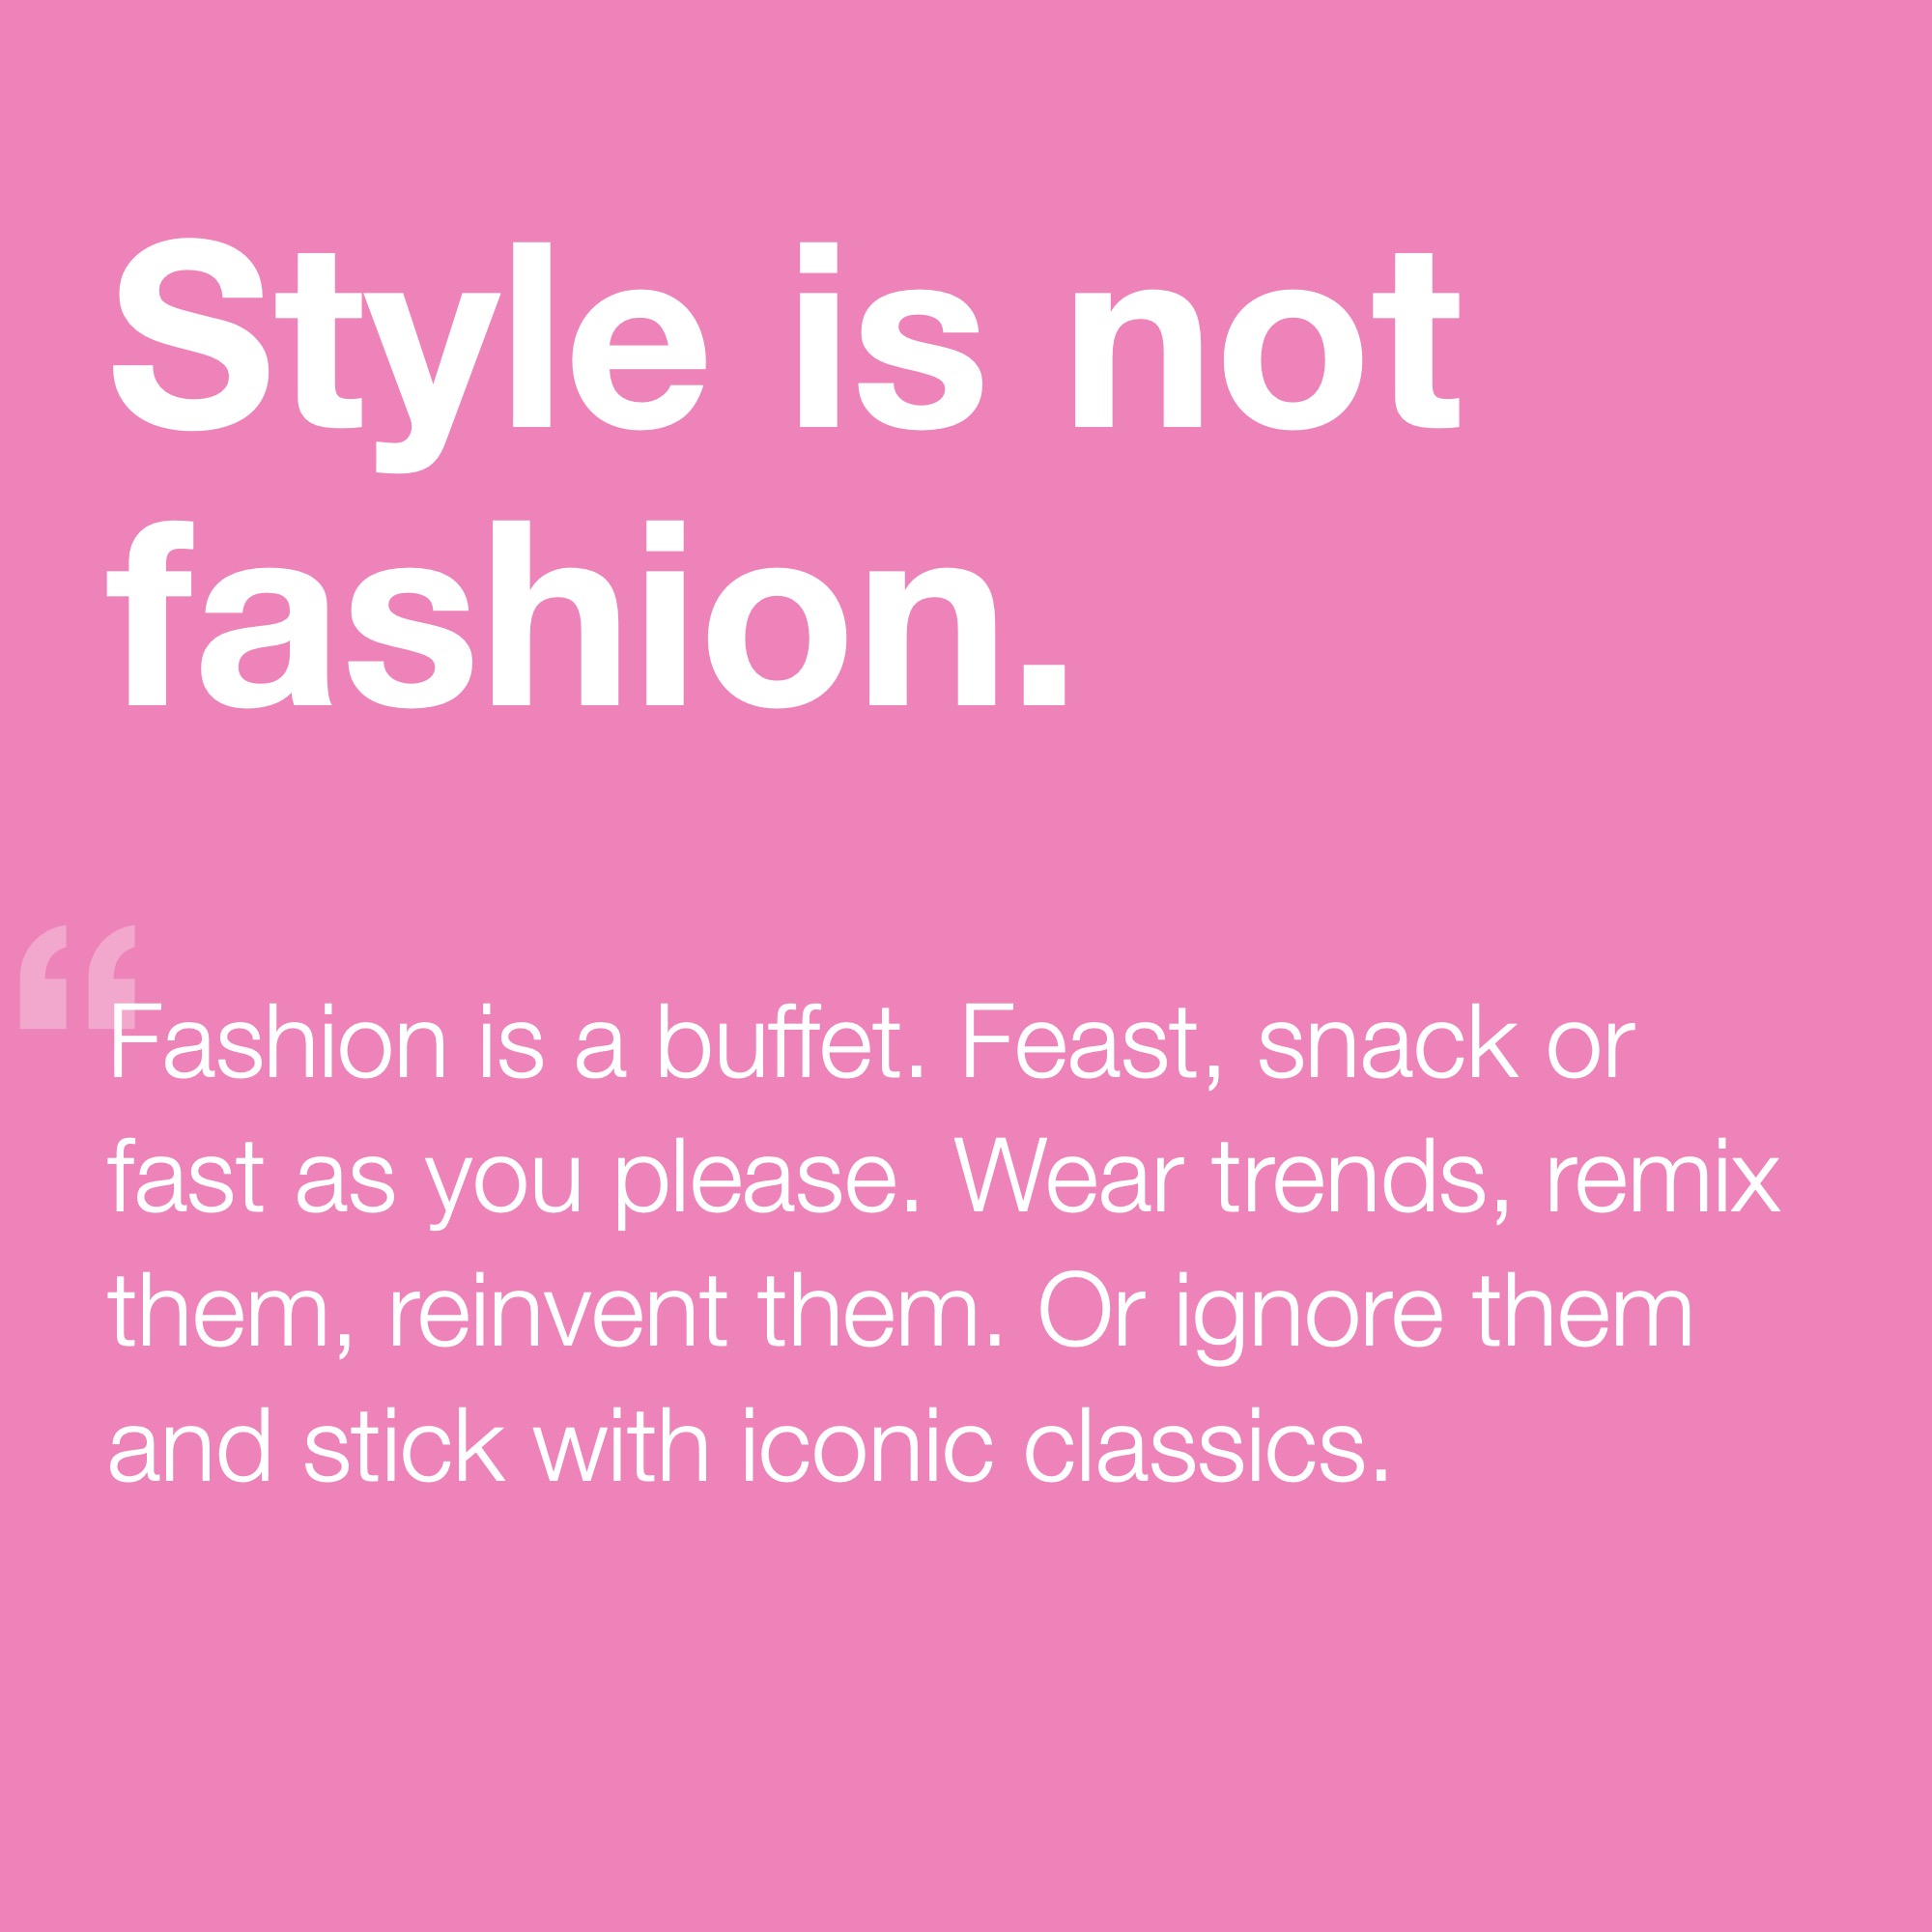 Style is not Fashion